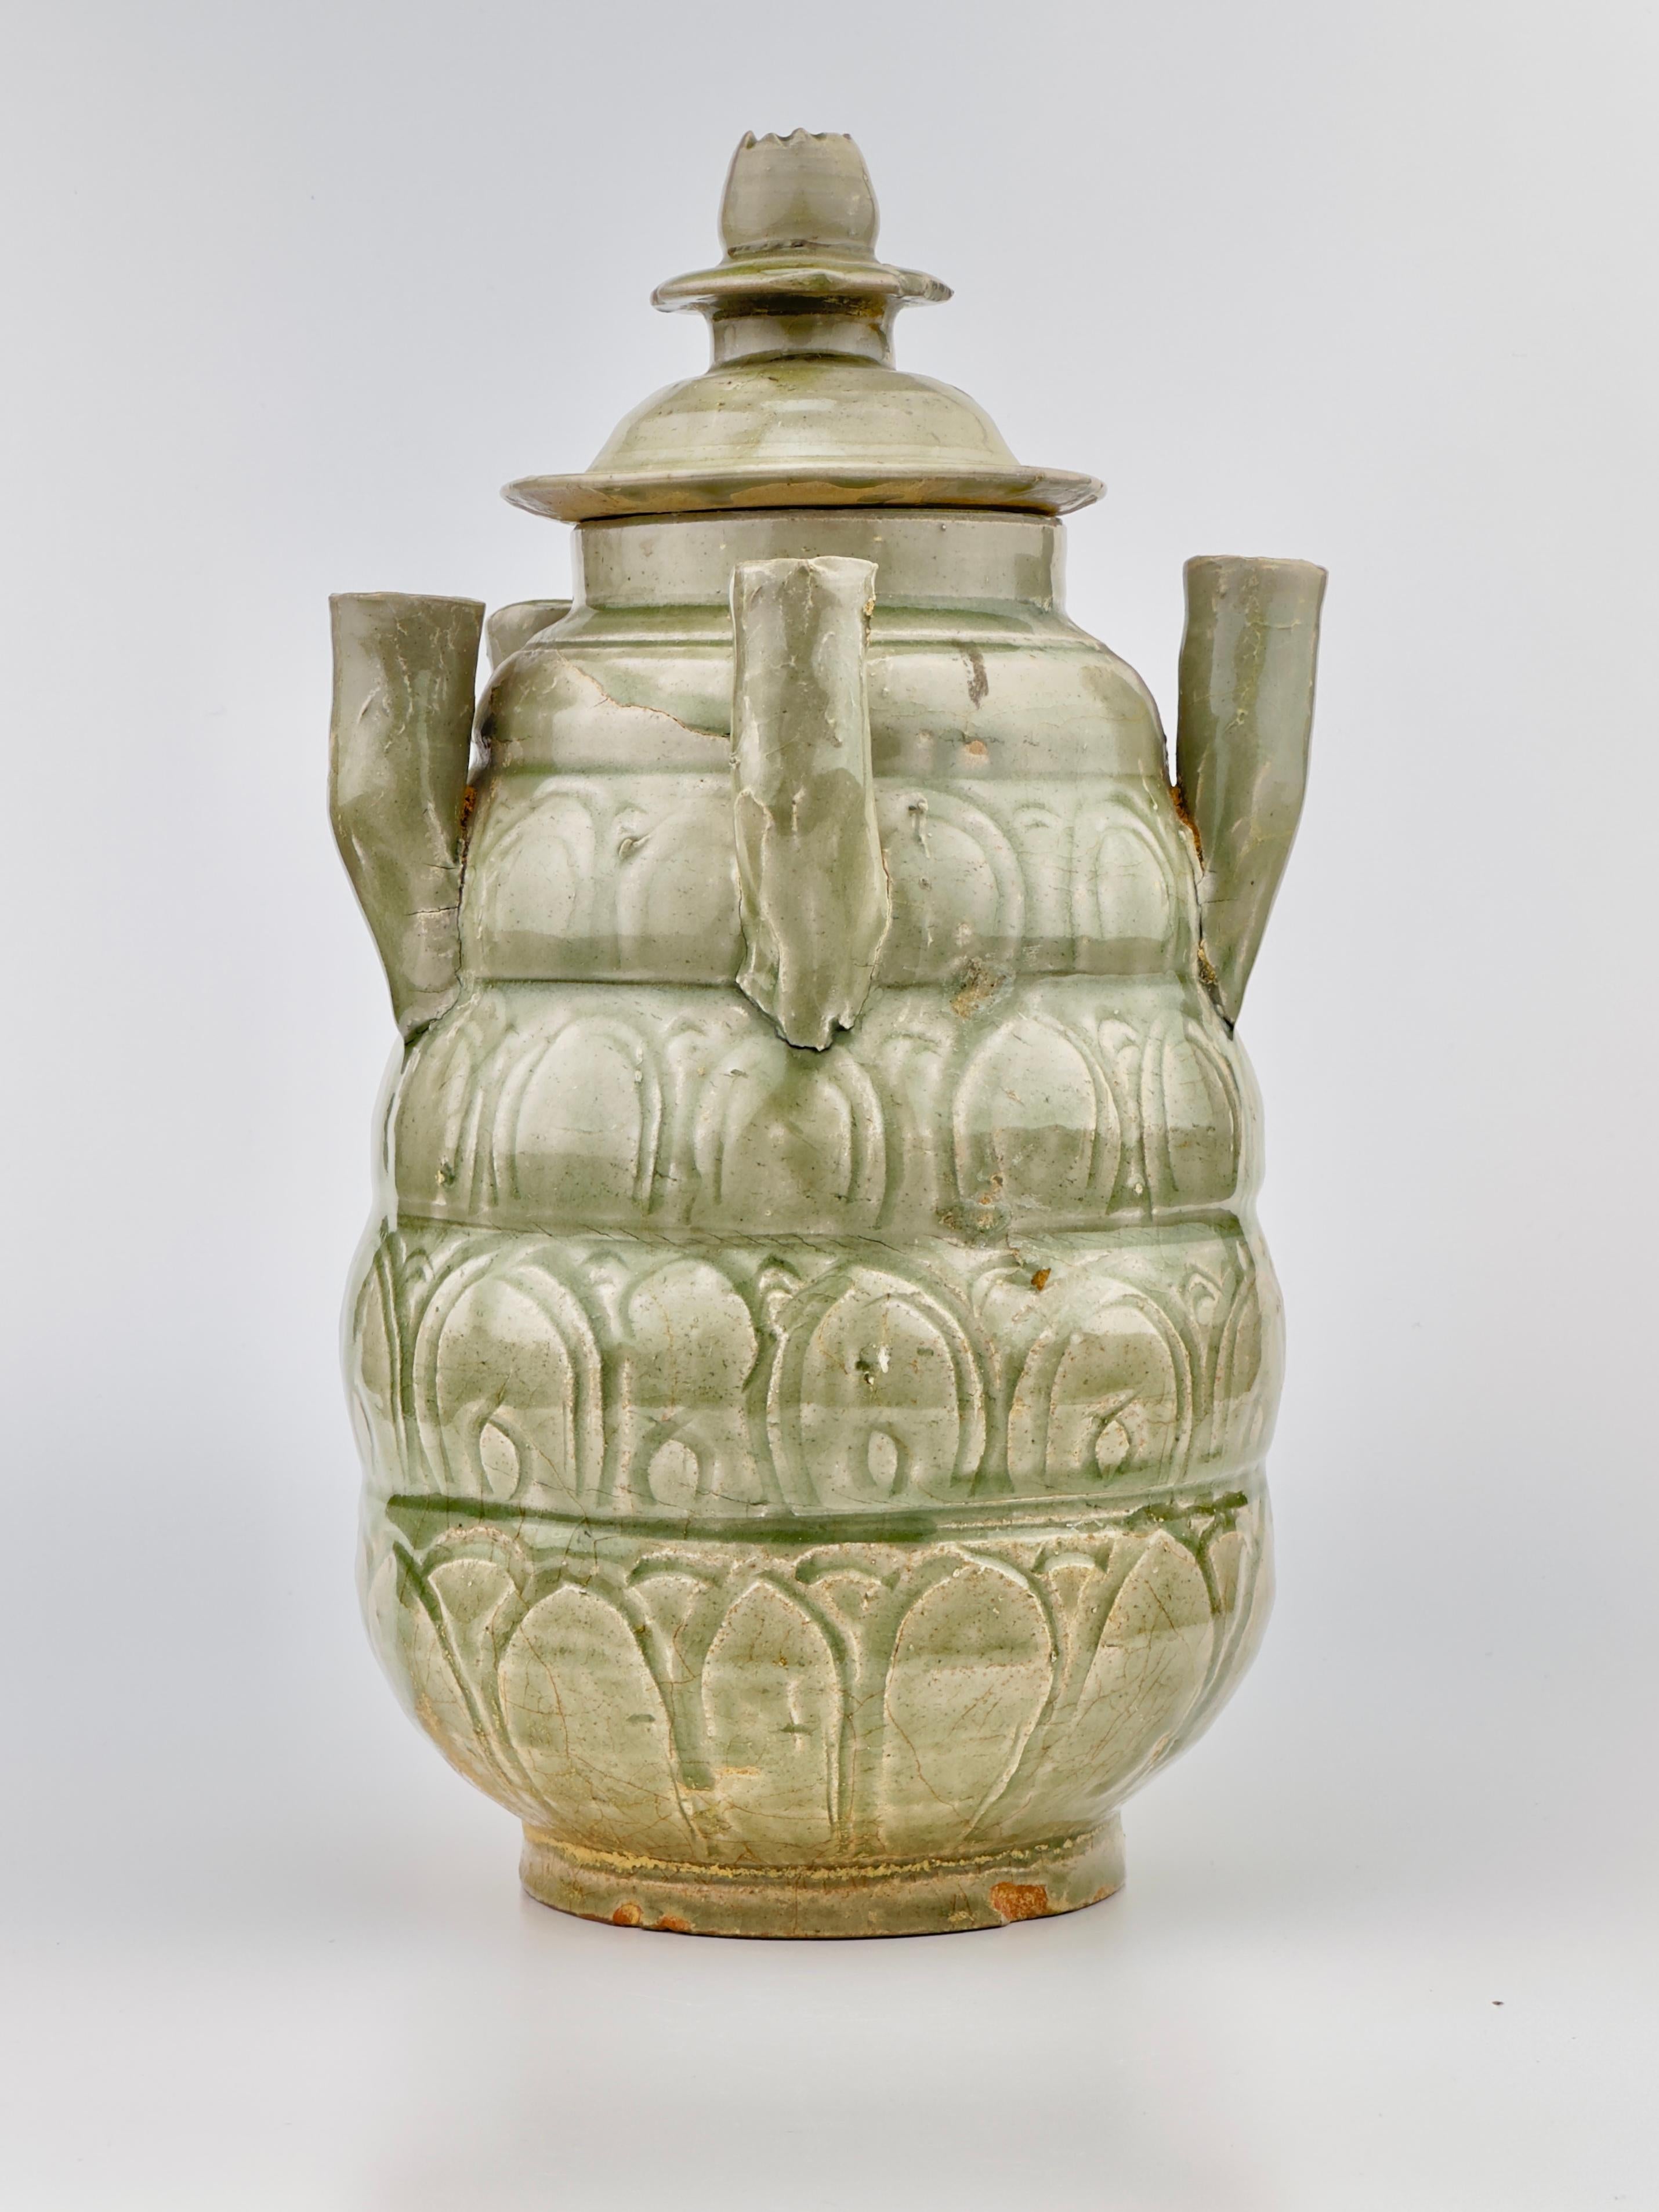 Thickly potted with an ovoid body of five horizontal lobes tapering toward the top, carries both aesthetic and practical values. The jar is intricately carved with rows of upright lotus petals beneath a band of vertical lines, a design that is both